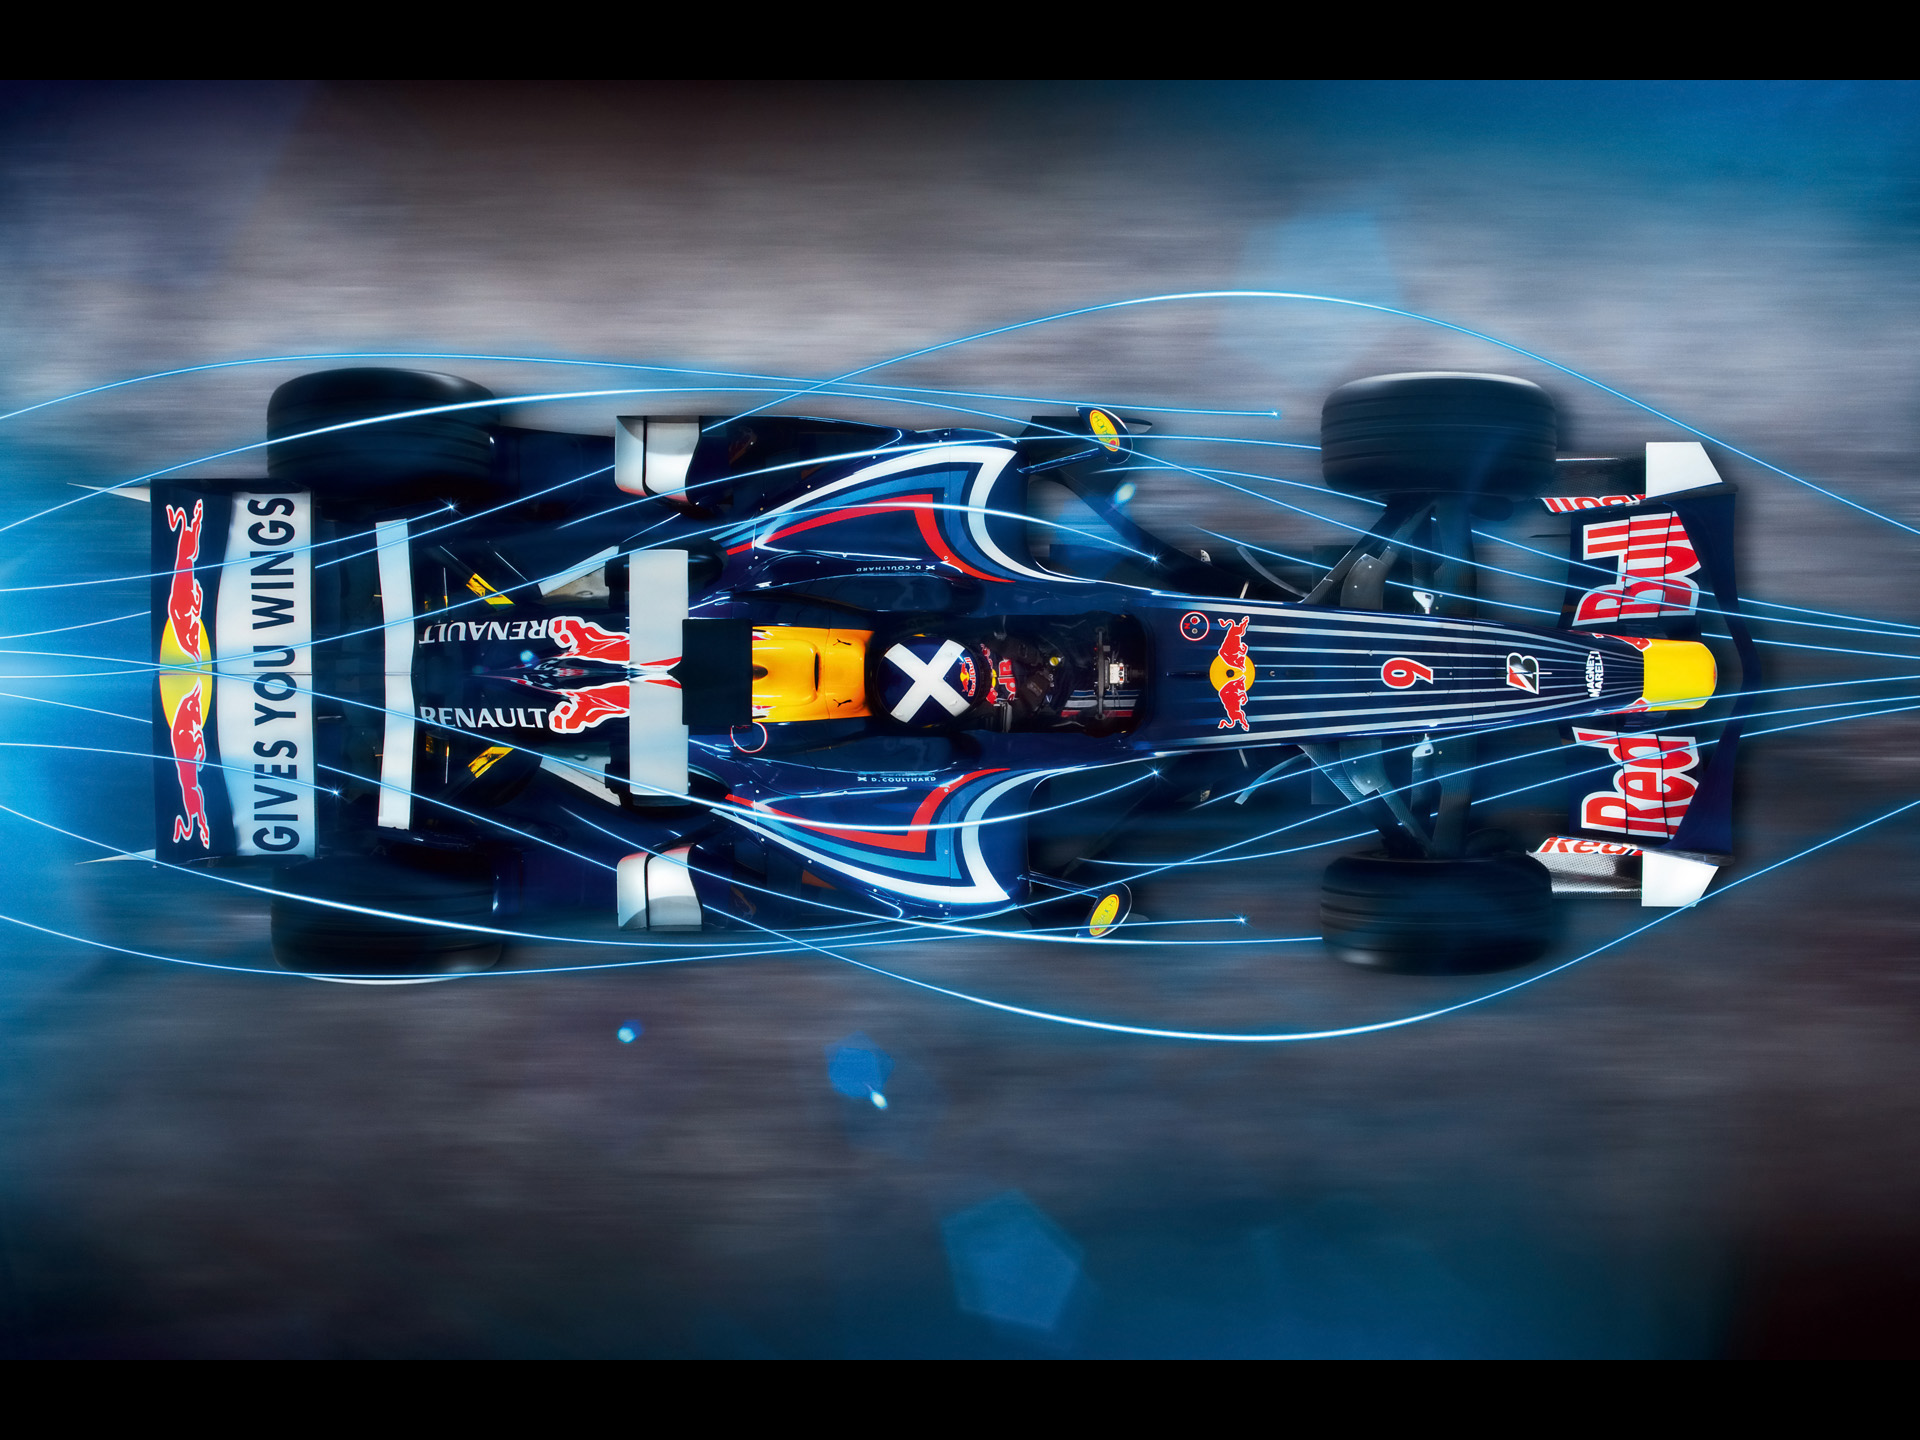 red-bull-rb4-f1-car-pictures-middot-red-bull-rb4-f1-photo-gallery_61f1a.jpg